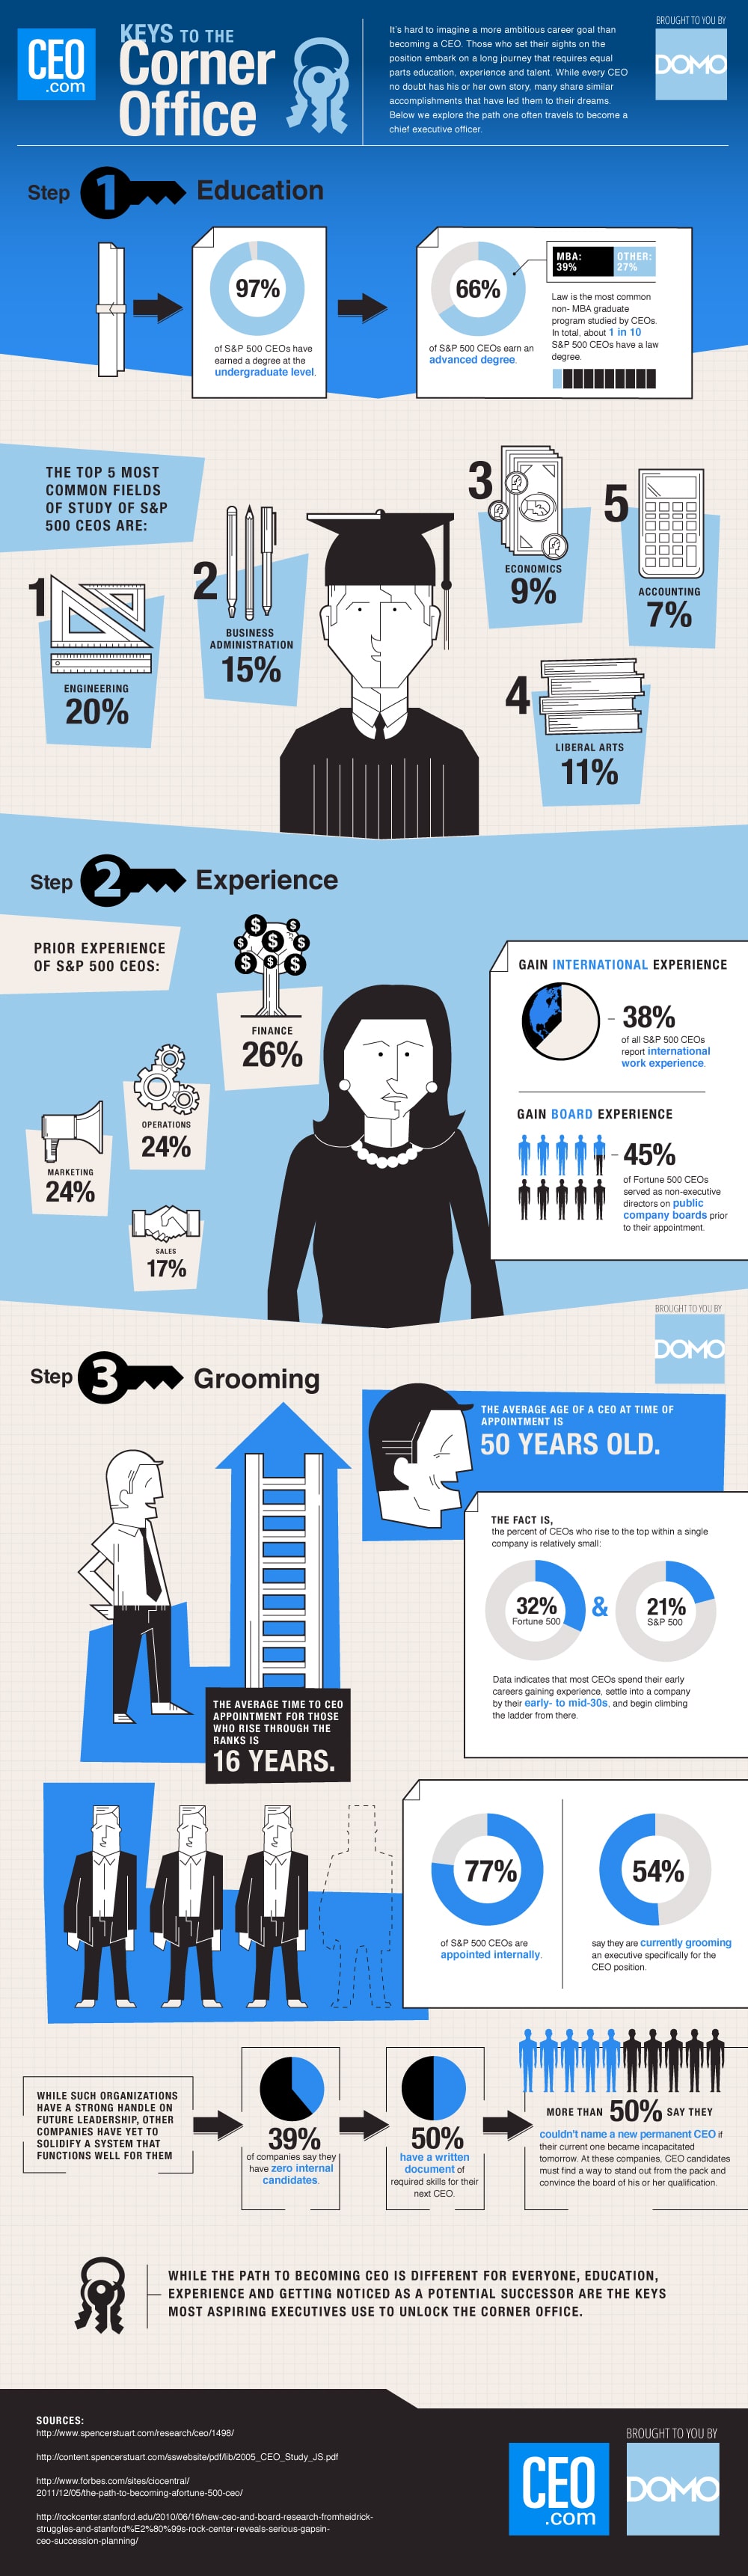 becoming-a-ceo-infographic